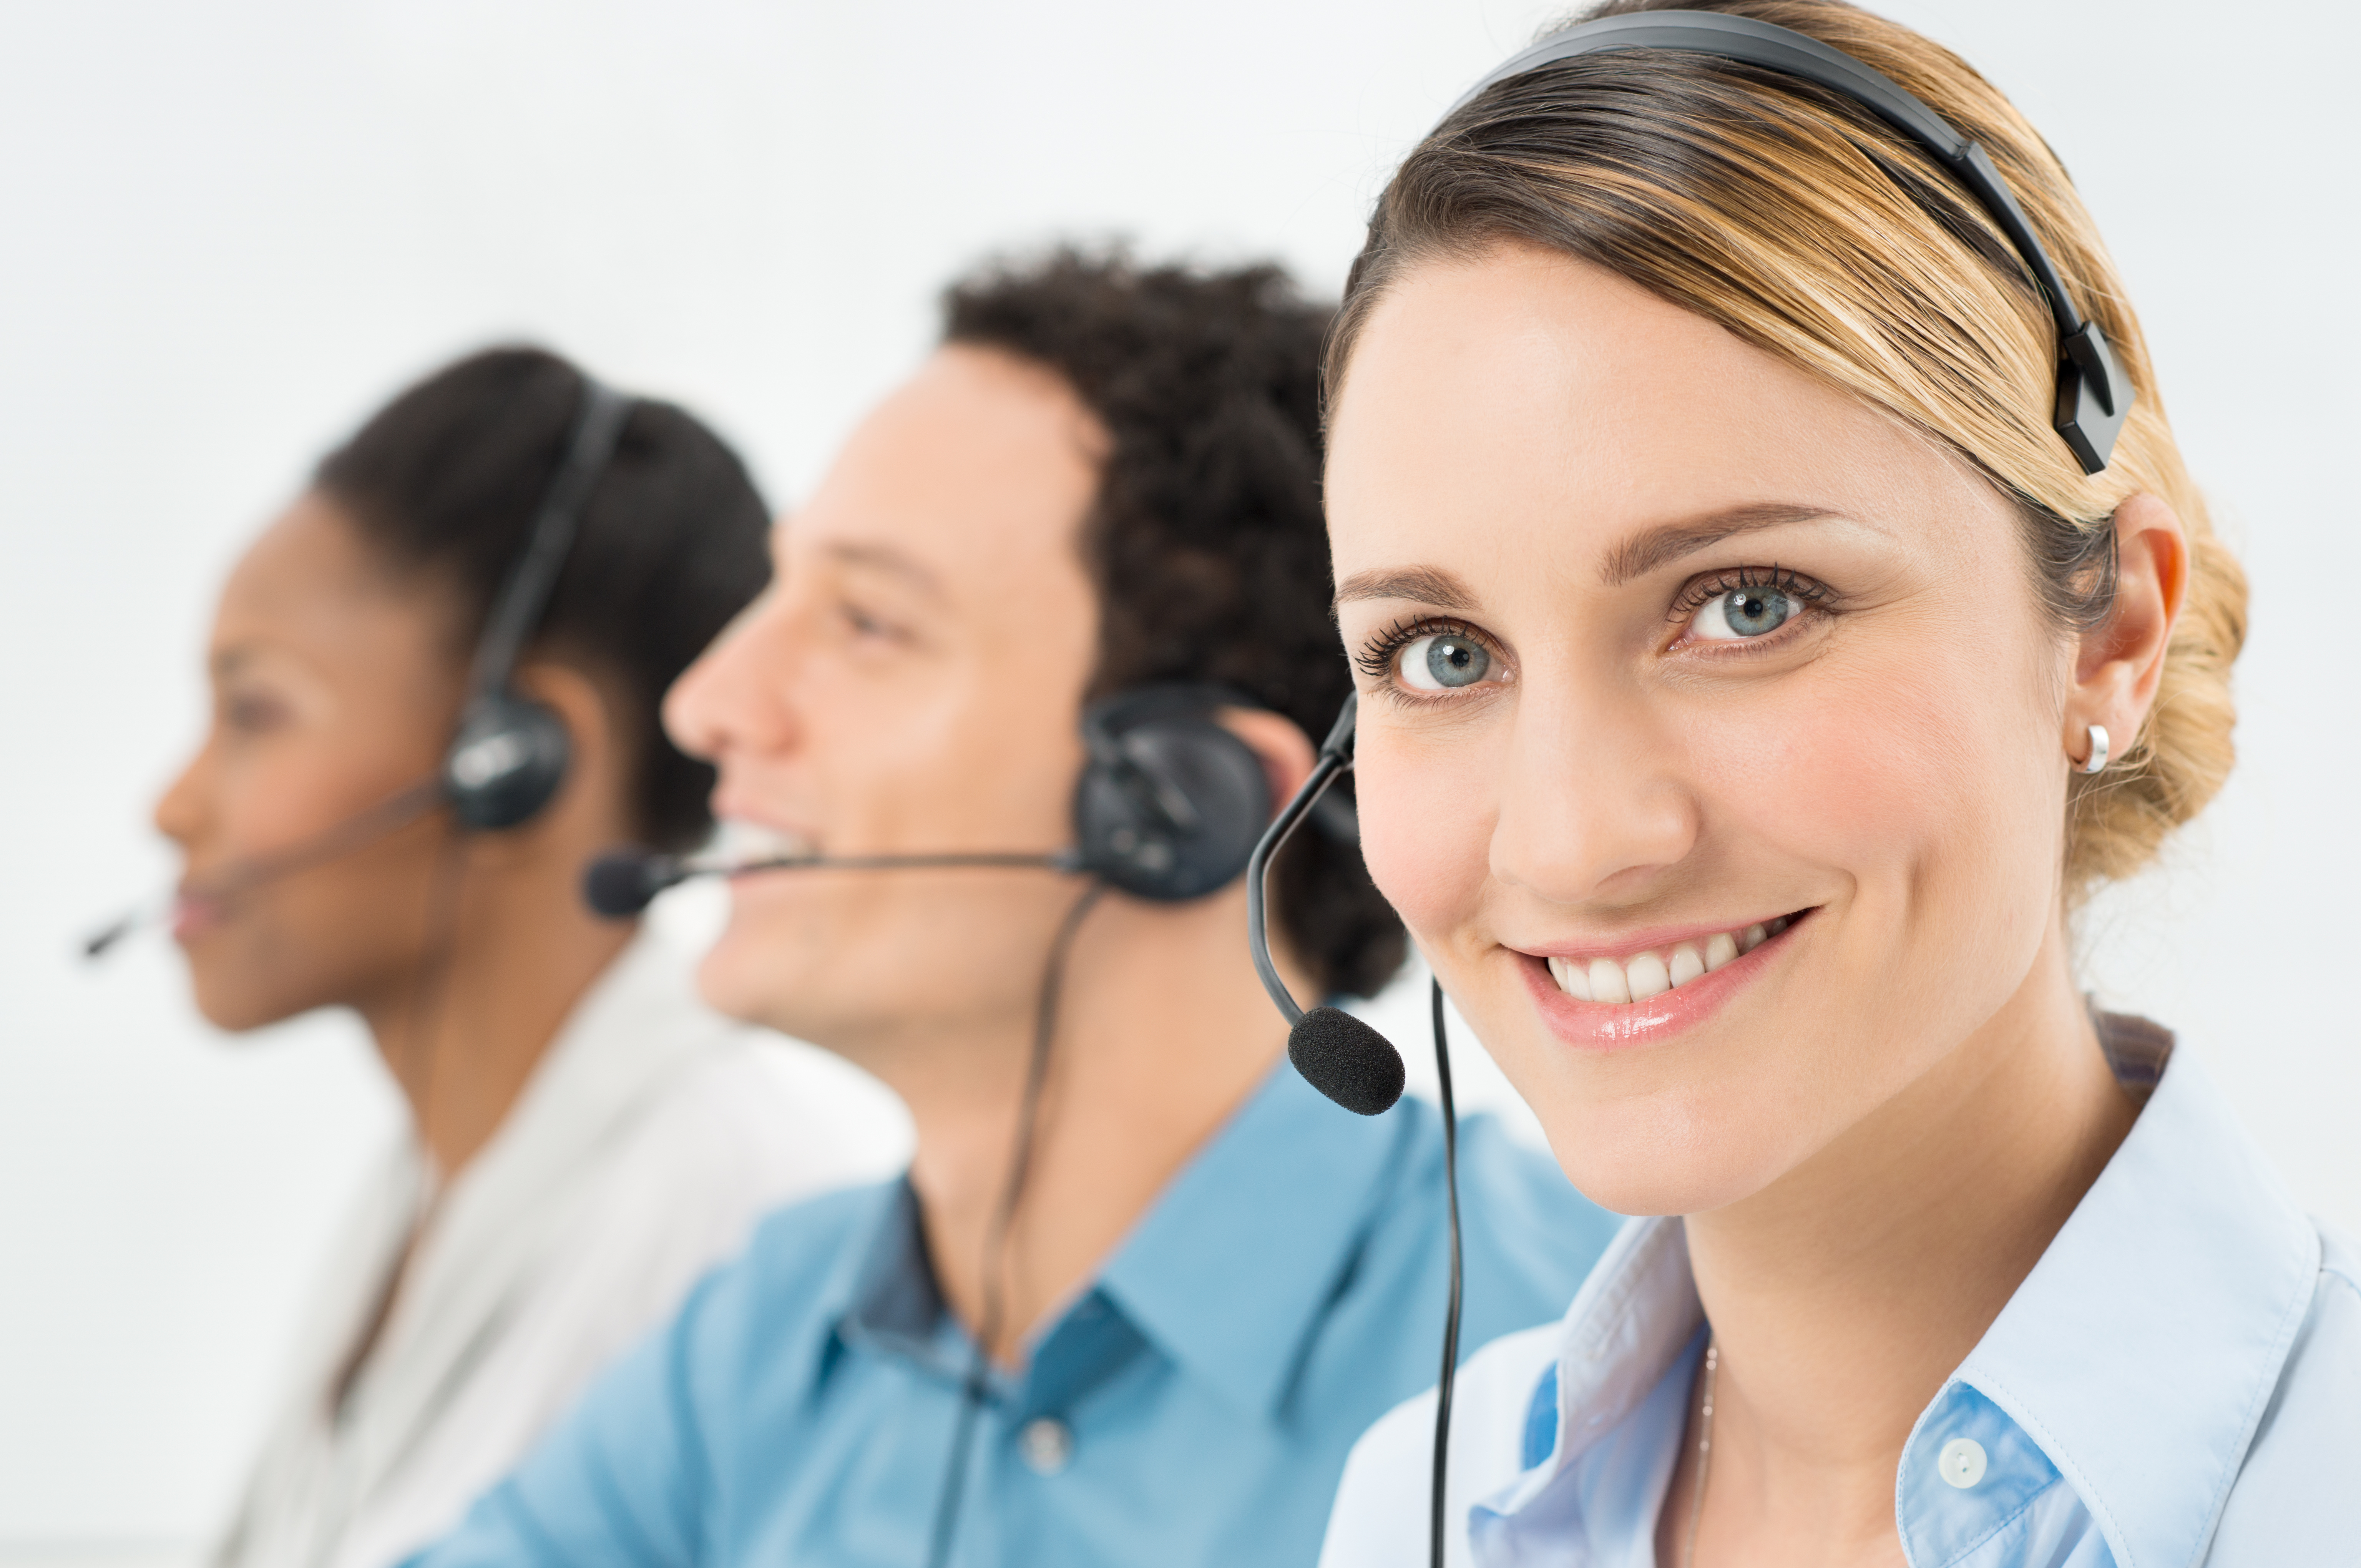  BPO (Business Process Outsourcing): A cost-saver or a revenue driver?